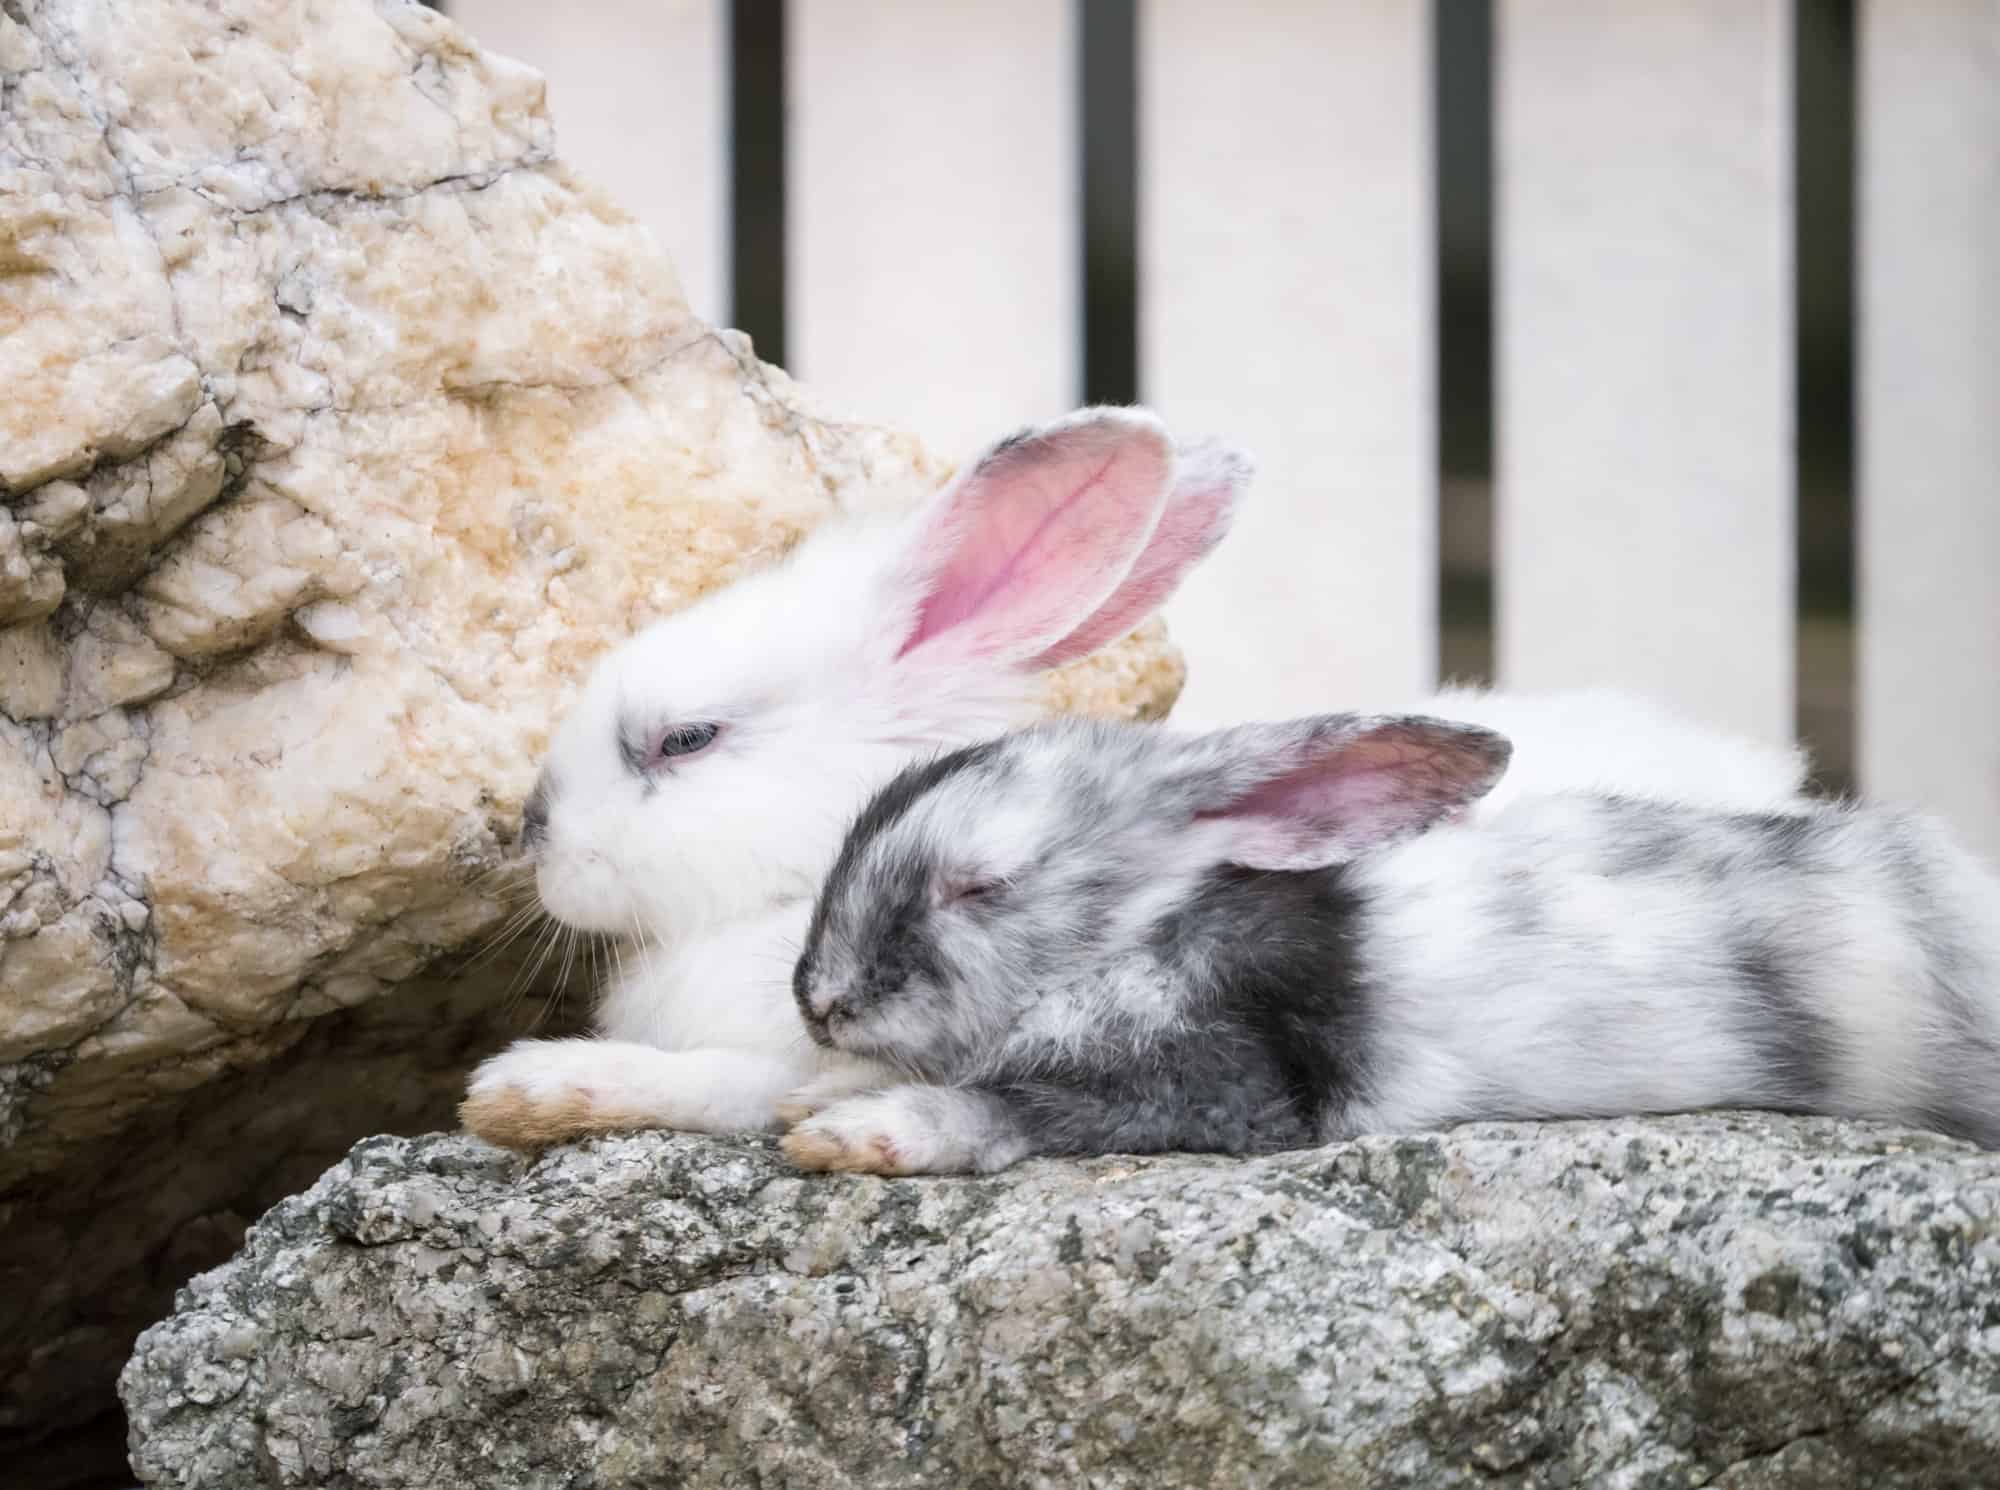 white and grey rabbits sleeping together